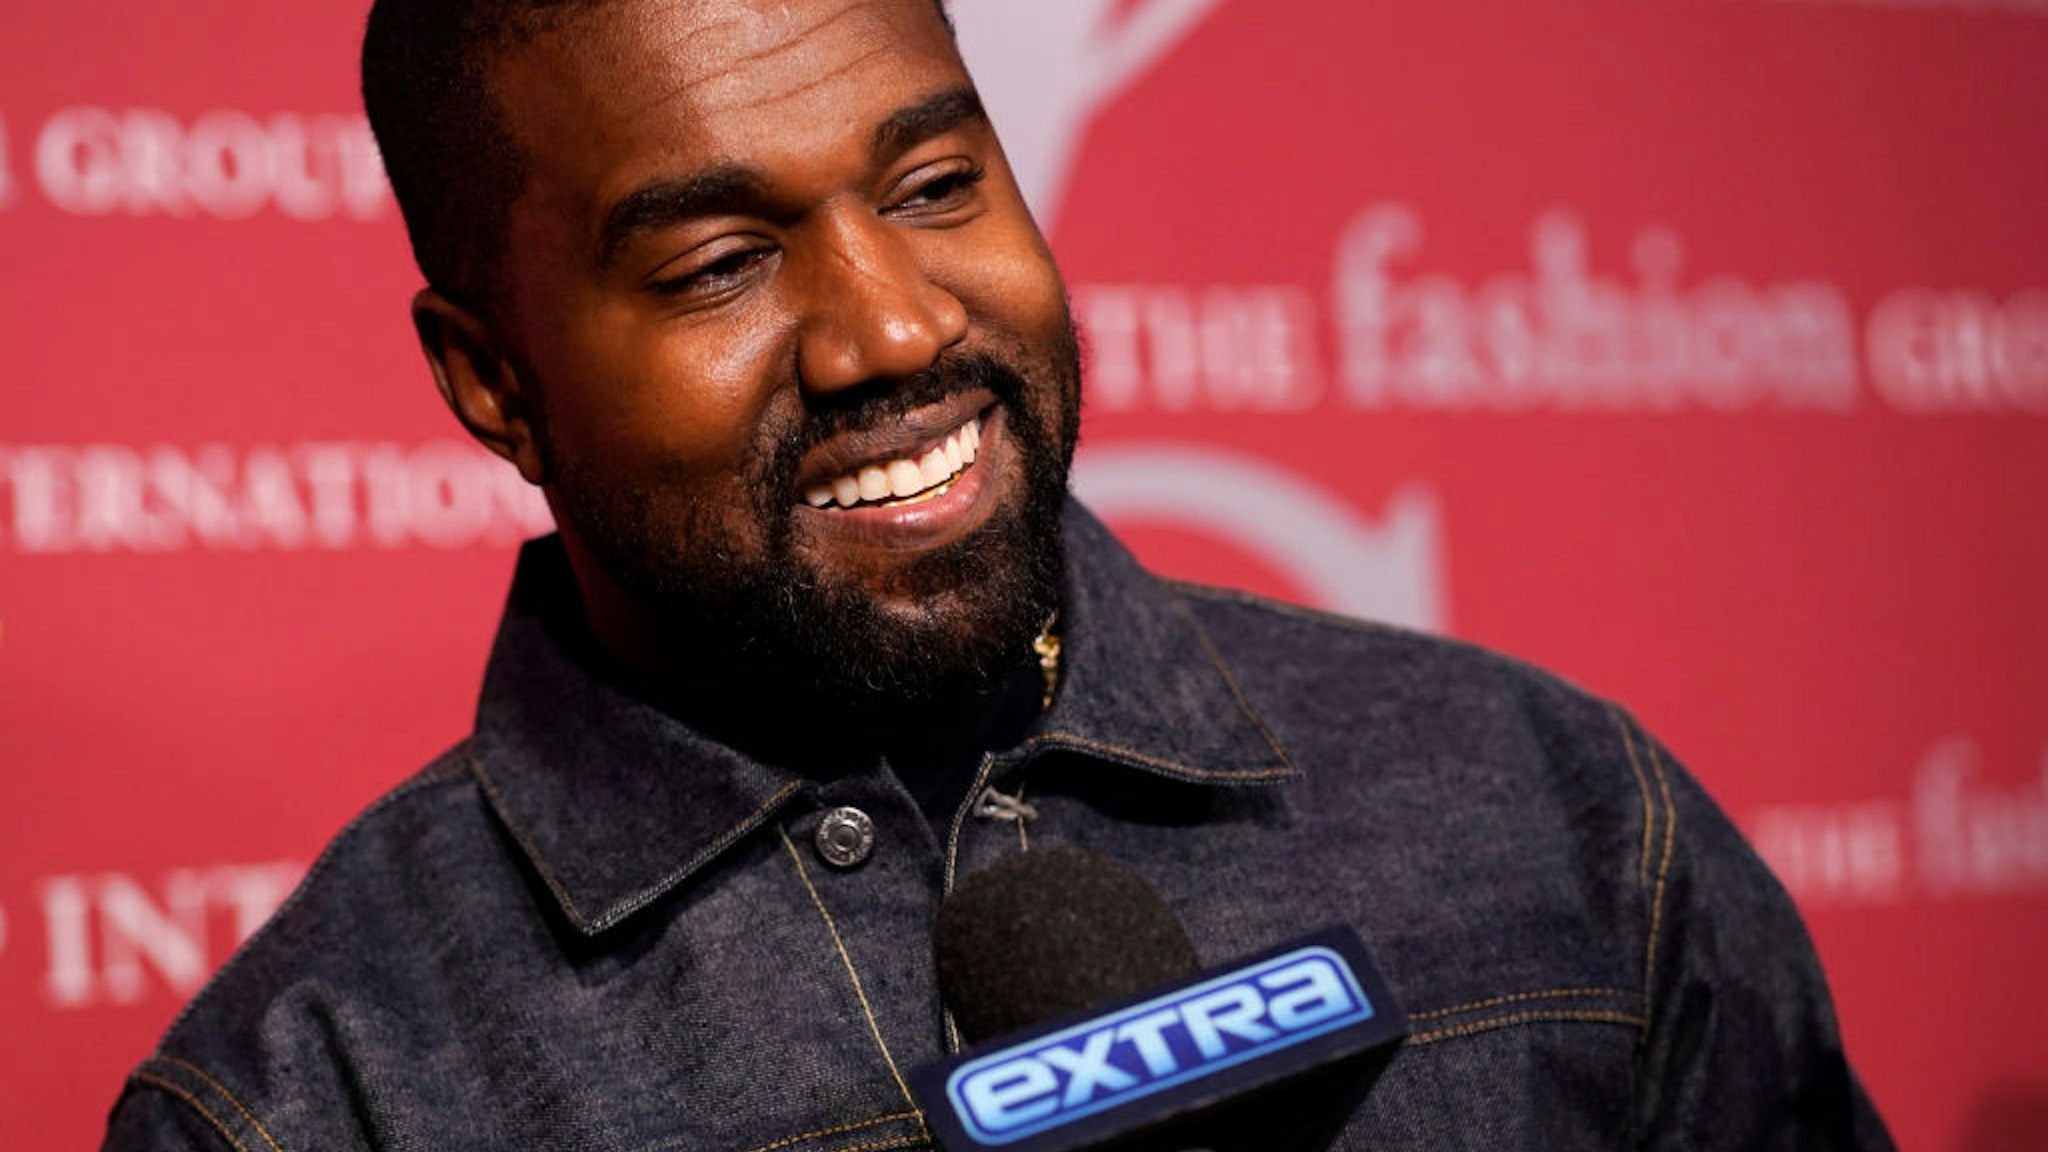 Kanye West attends the FGI 36th Annual Night of Stars Gala at Cipriani Wall Street on October 24, 2019 in New York City.